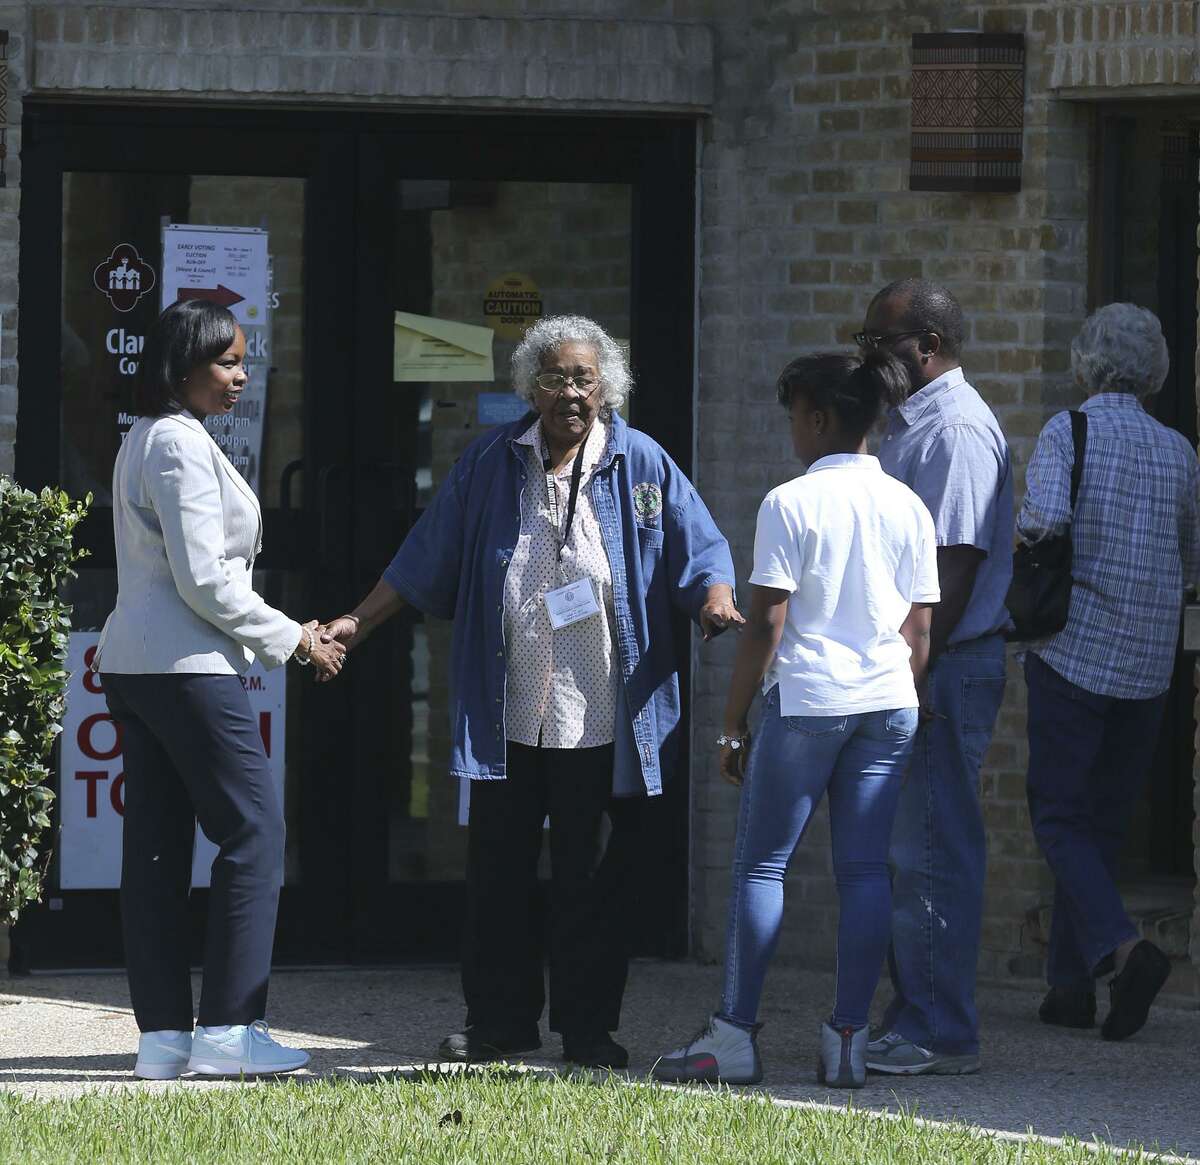 San Antonio mayor Ivy Taylor (left) enters the Claude Black Center Monday June 5, 2017 before casting her ballot during early voting. Taylor was accompanied by her daughter Morgan Taylor,13, and her husband Rodney Taylor. Taylor said she voted for herself.